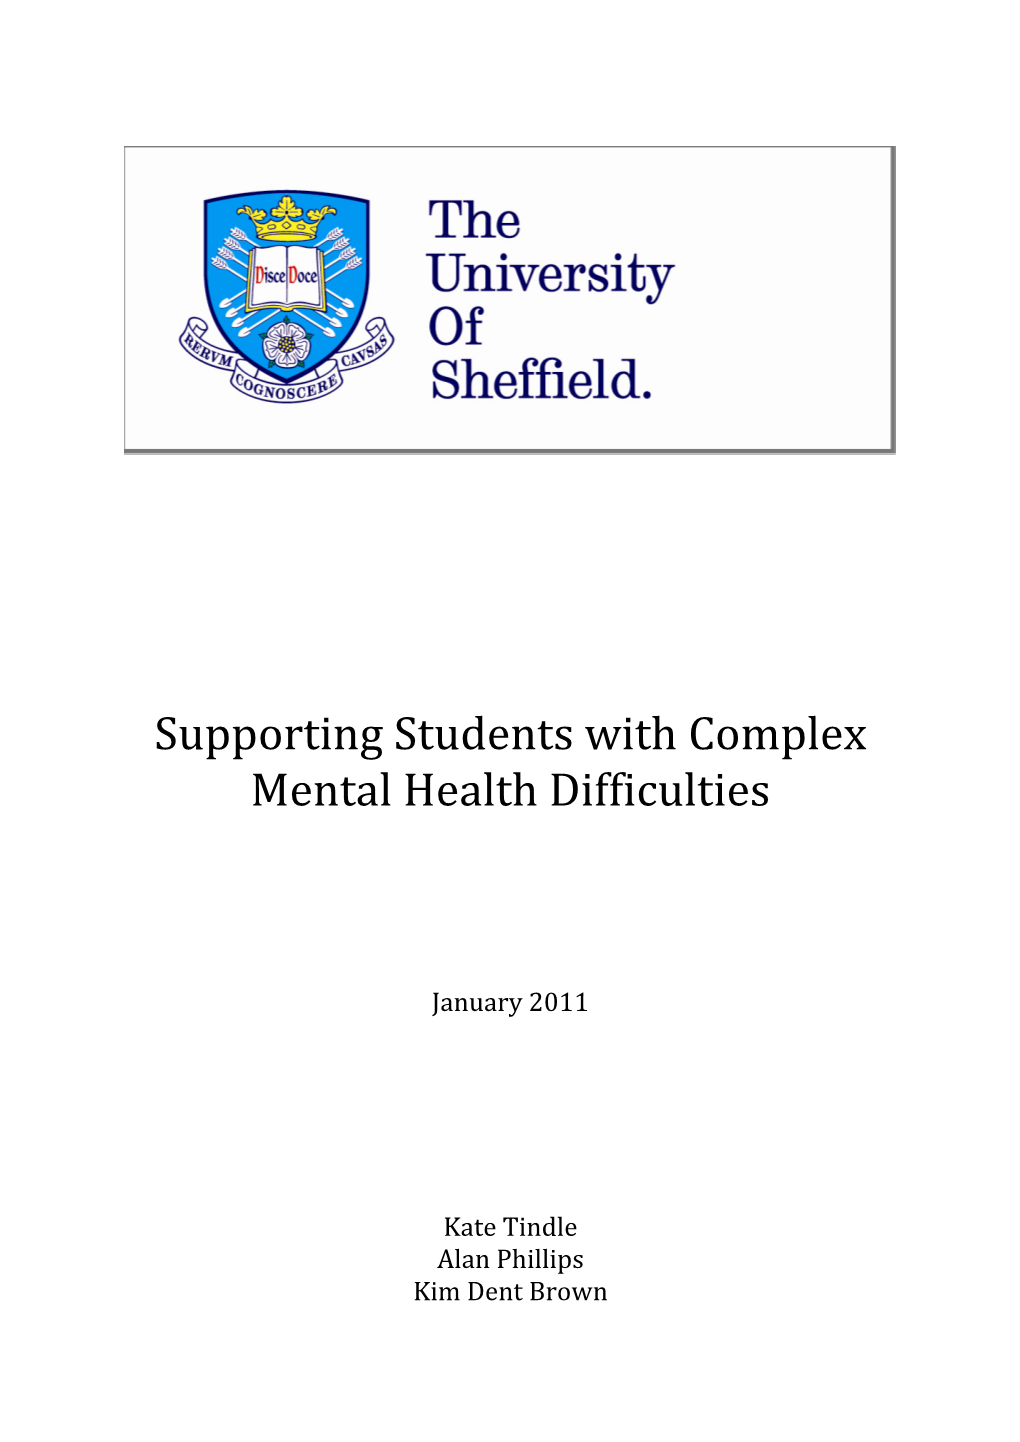 Supporting Students with Complex Mental Health Difficulties